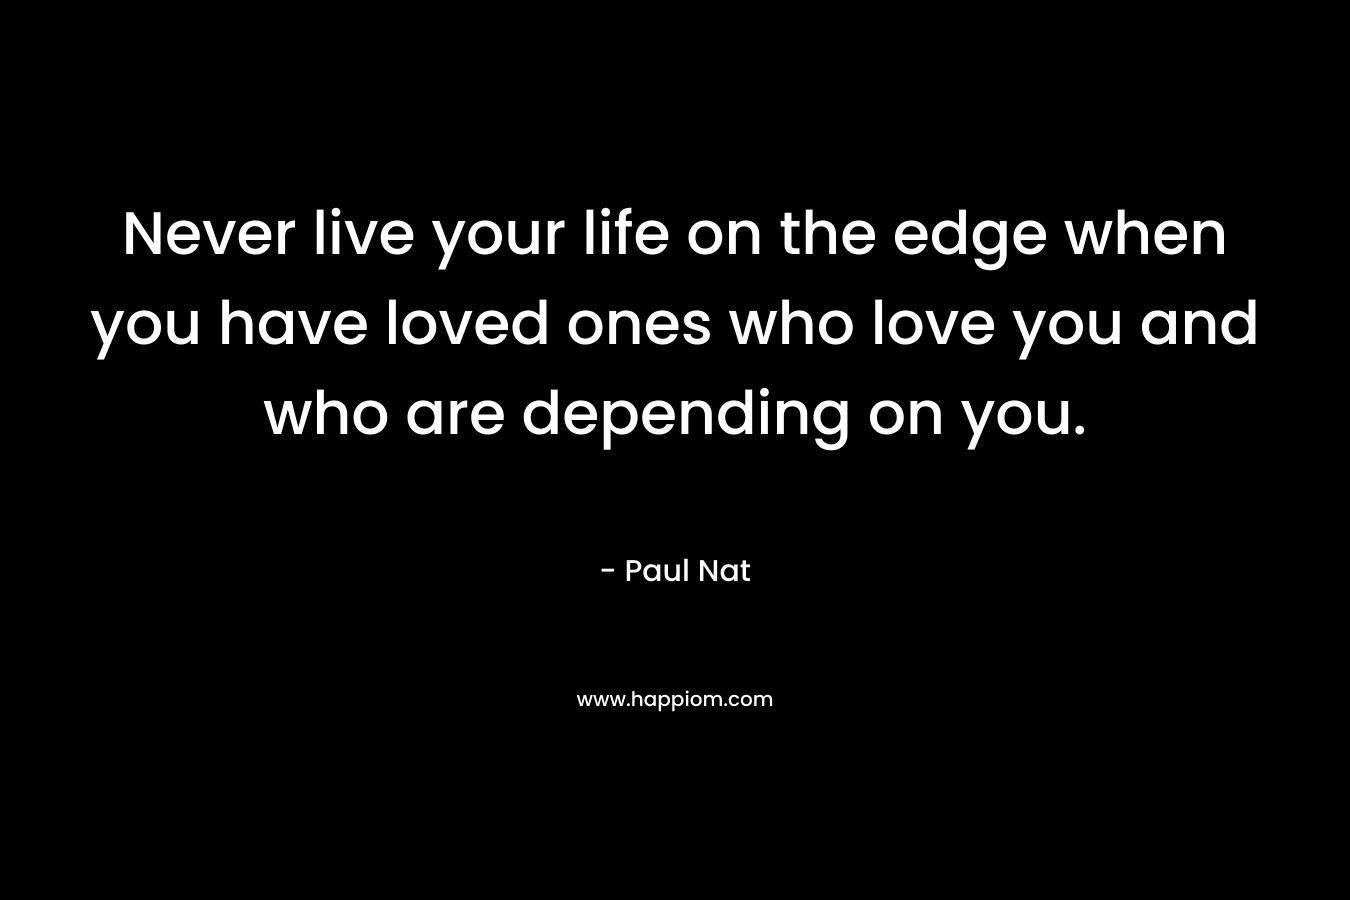 Never live your life on the edge when you have loved ones who love you and who are depending on you. – Paul Nat